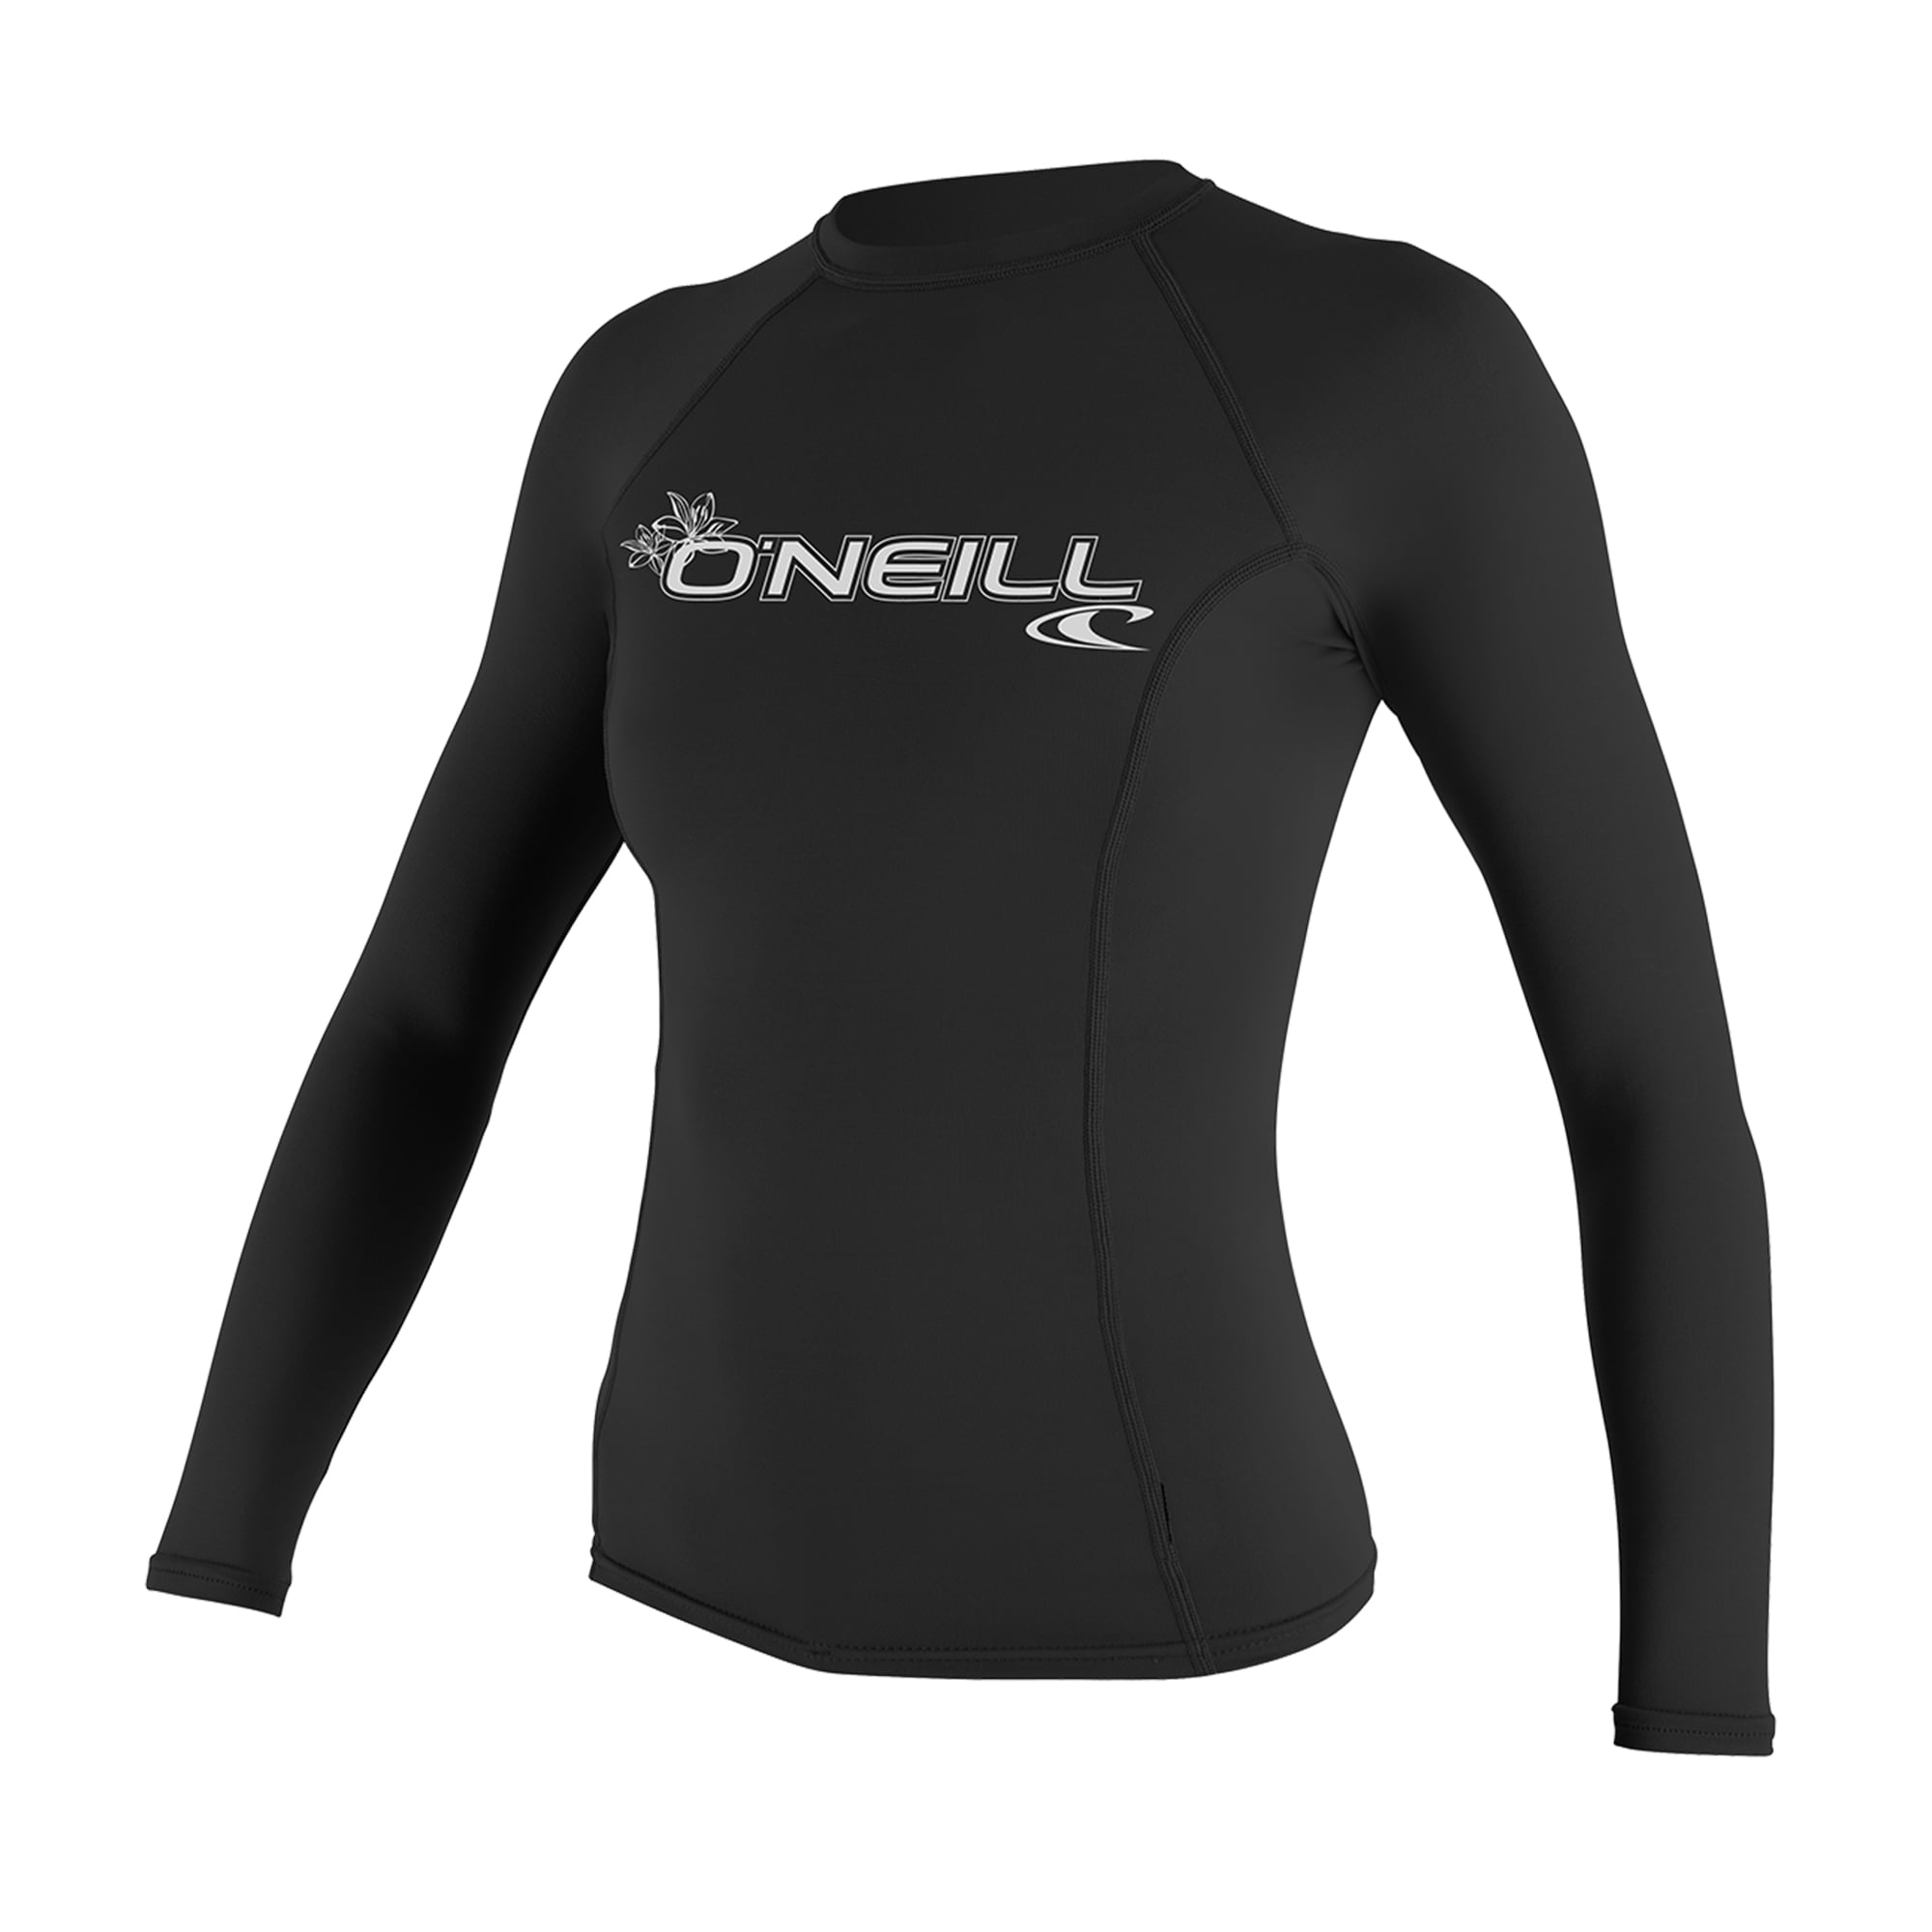 ONeill Wetsuits Womens Basic Skins Long Sleeve Rash Guard Oneill Uv Sun Protection-Black S Small